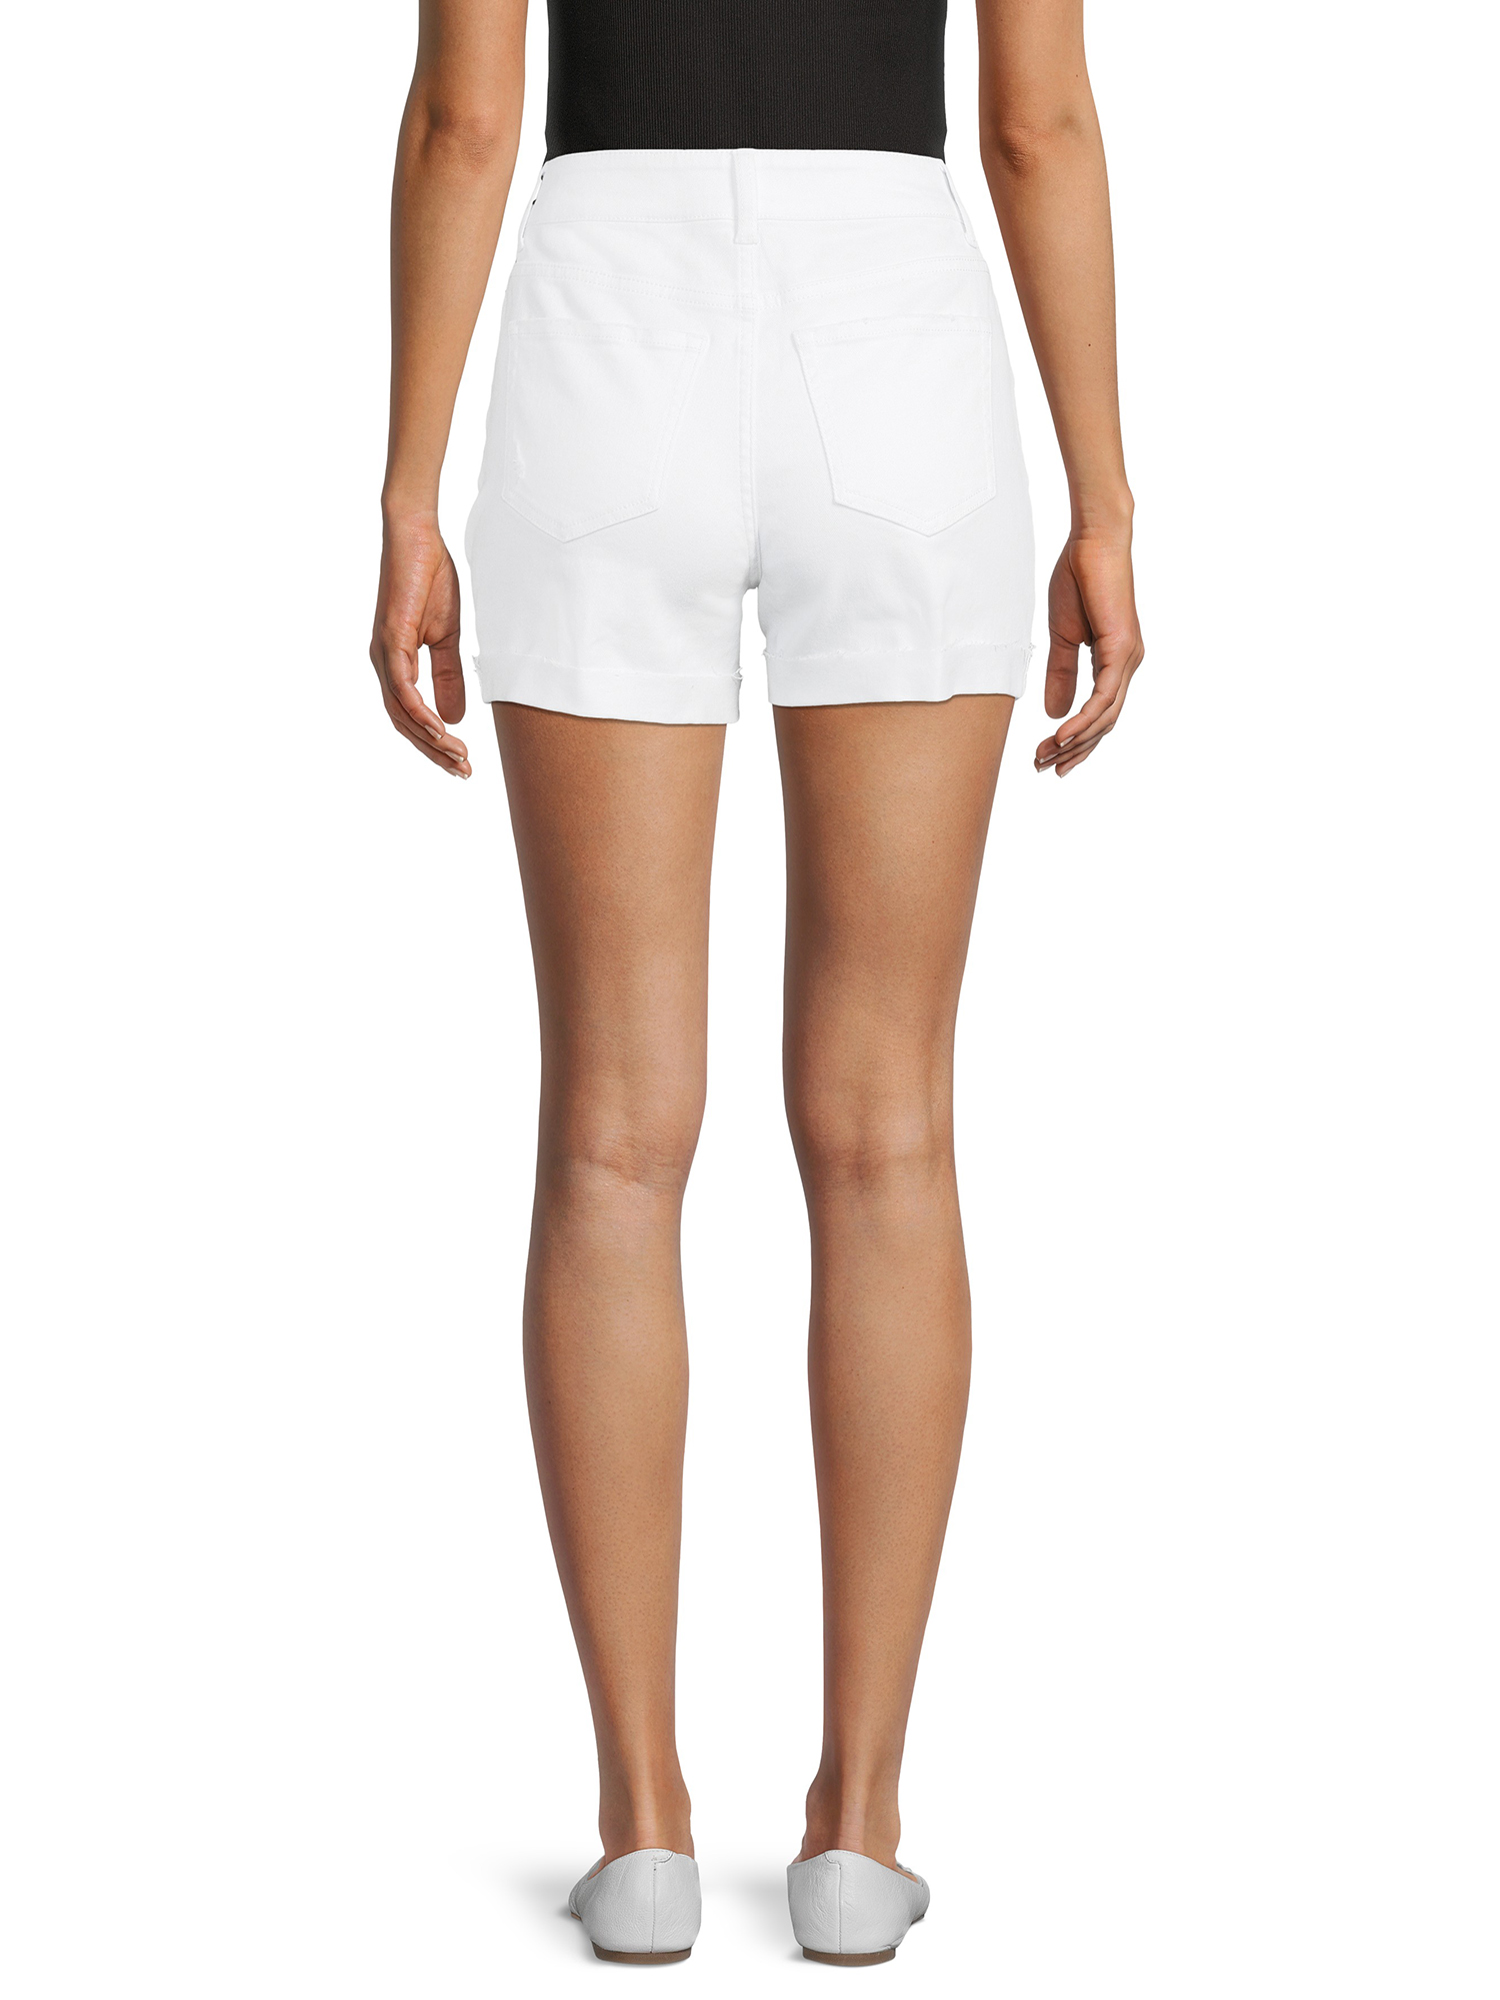 Time and Tru Women's Mid Rise Denim Short - image 3 of 5